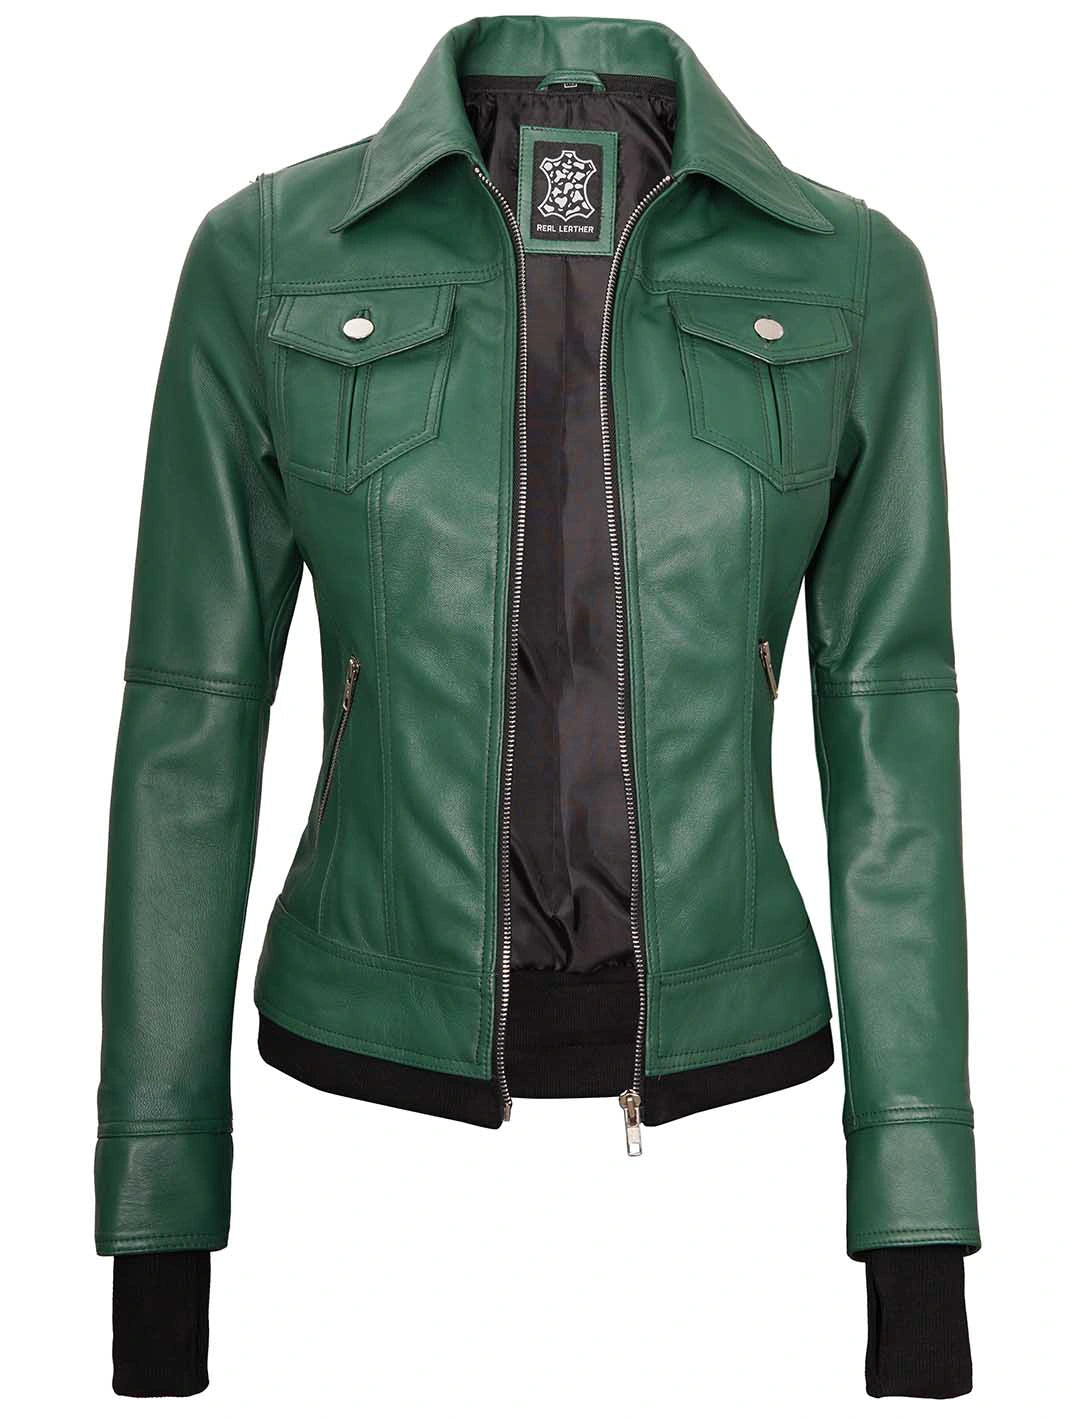 green hooded leather jacket hooded